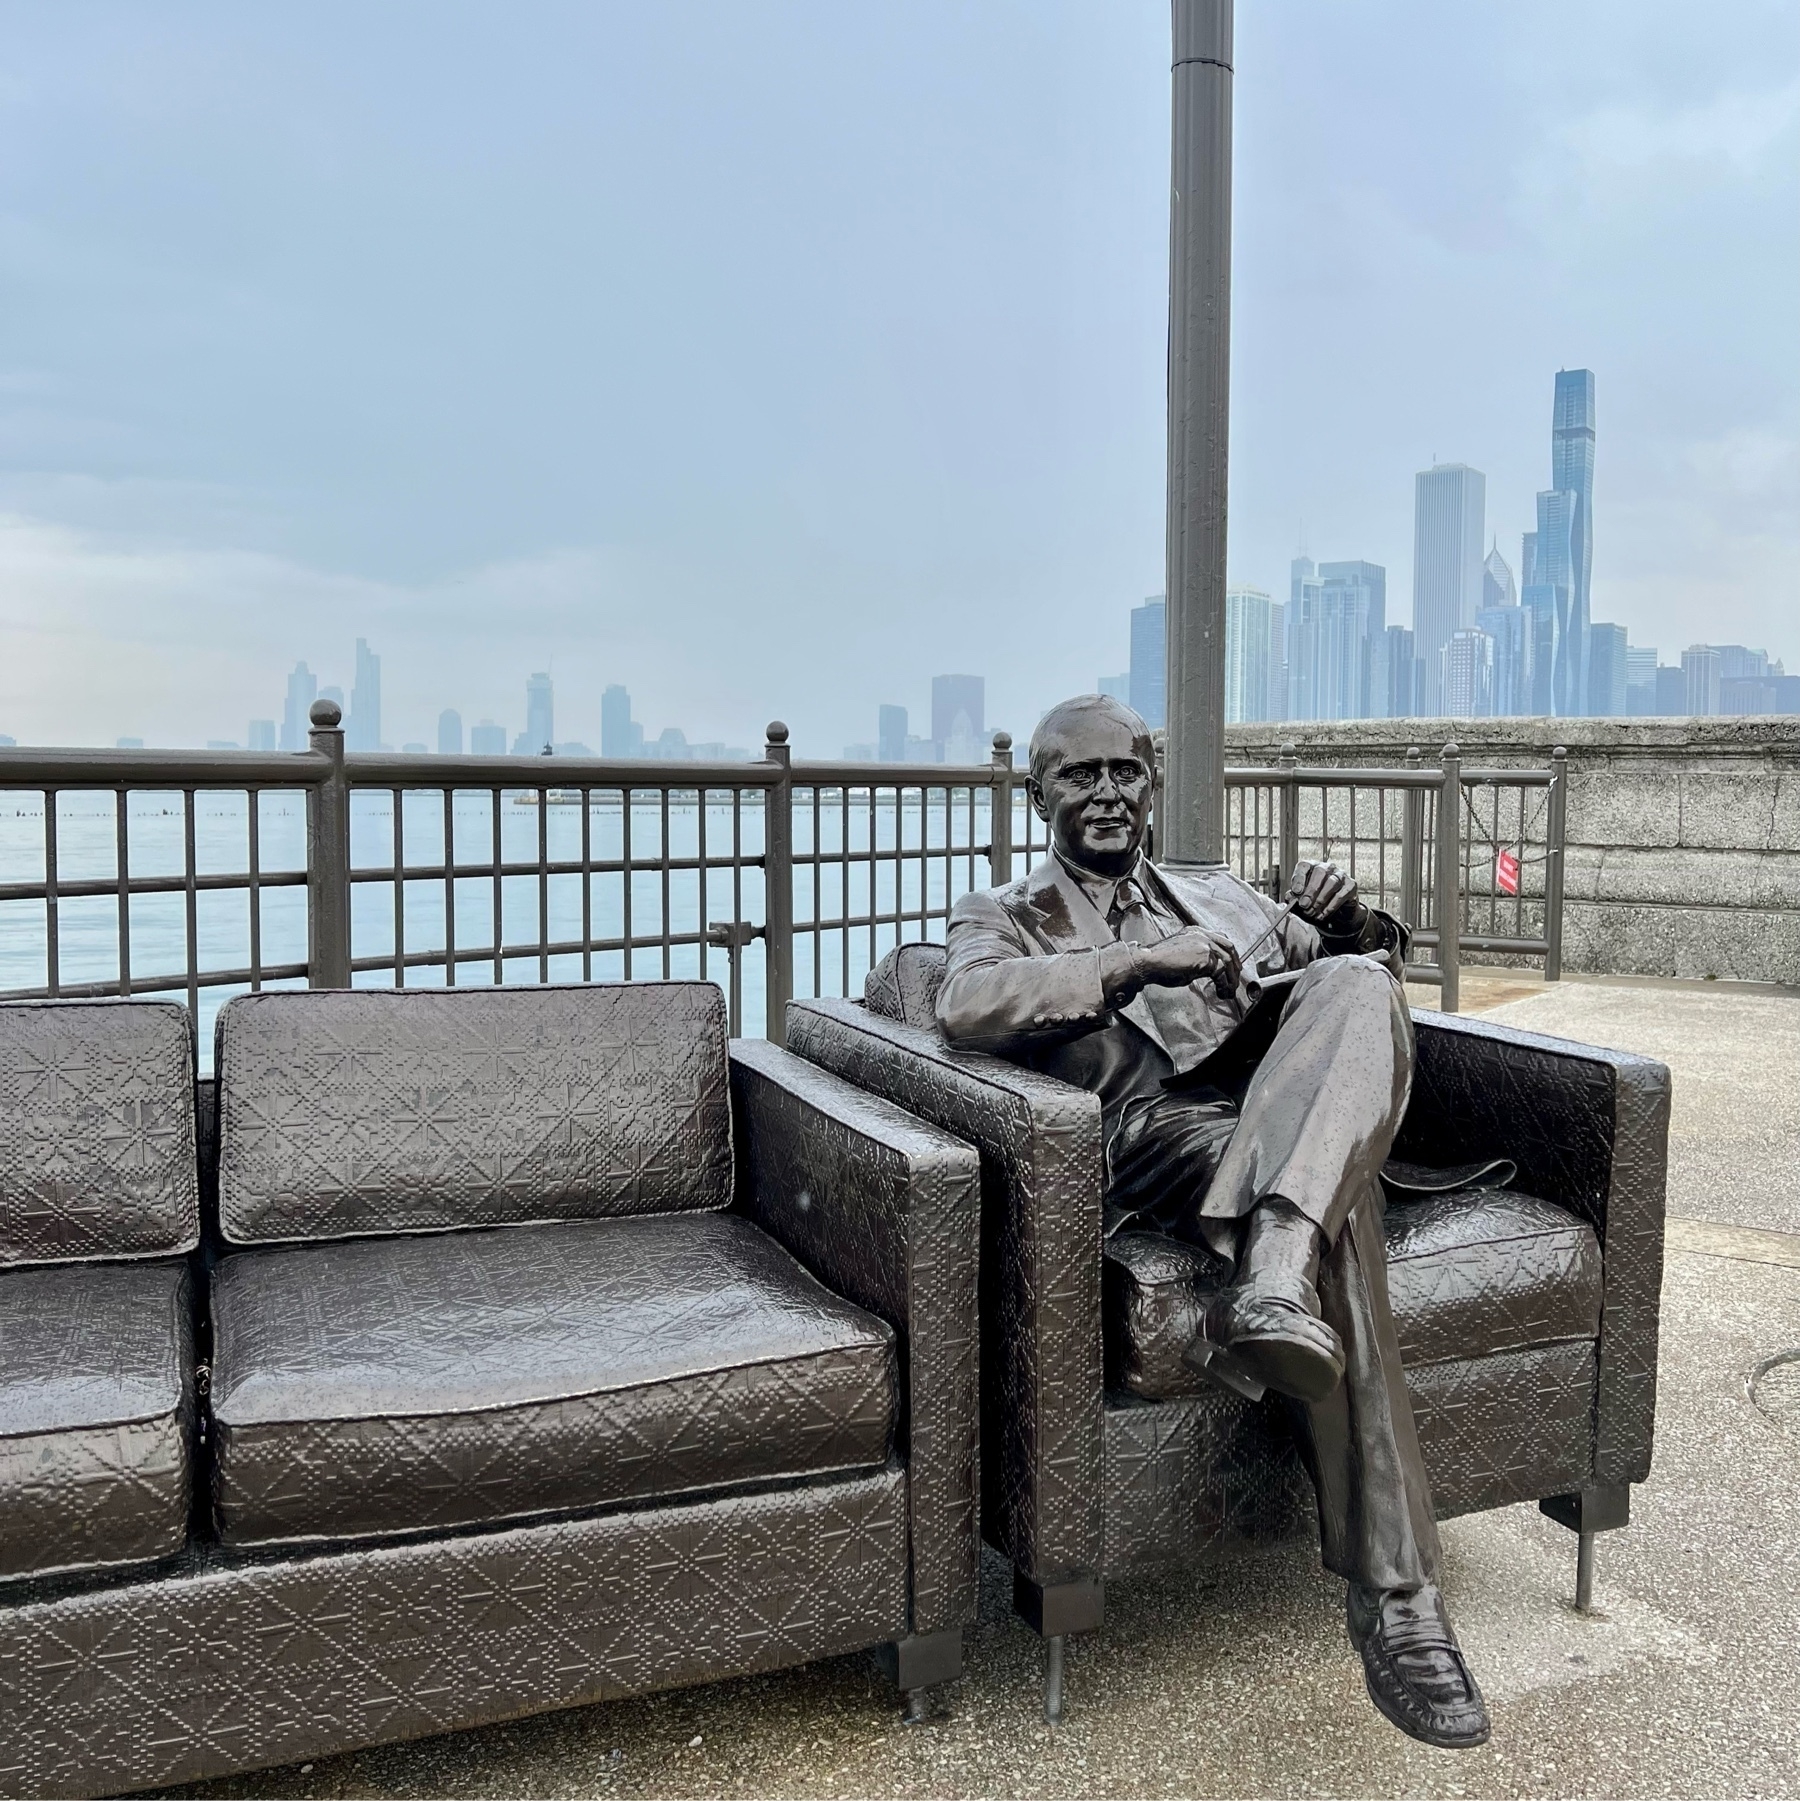 The Bob Newhart statue on Chicago's Navy pier, on a cloudy day.